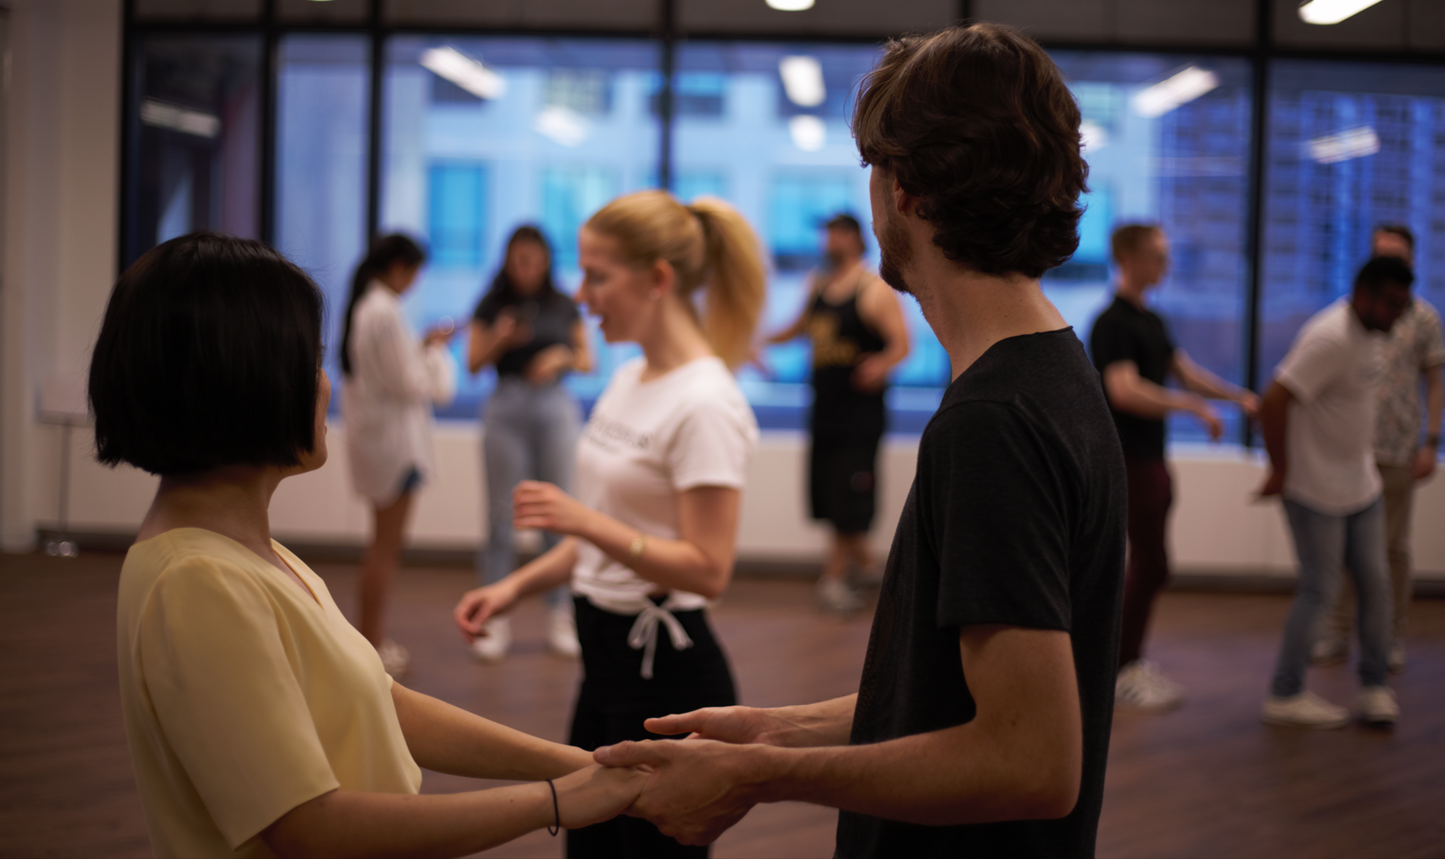 A couple watches attentively as the dance teacher gives instructions during a salsa class at a corporate event taking place in the office's lunch room.